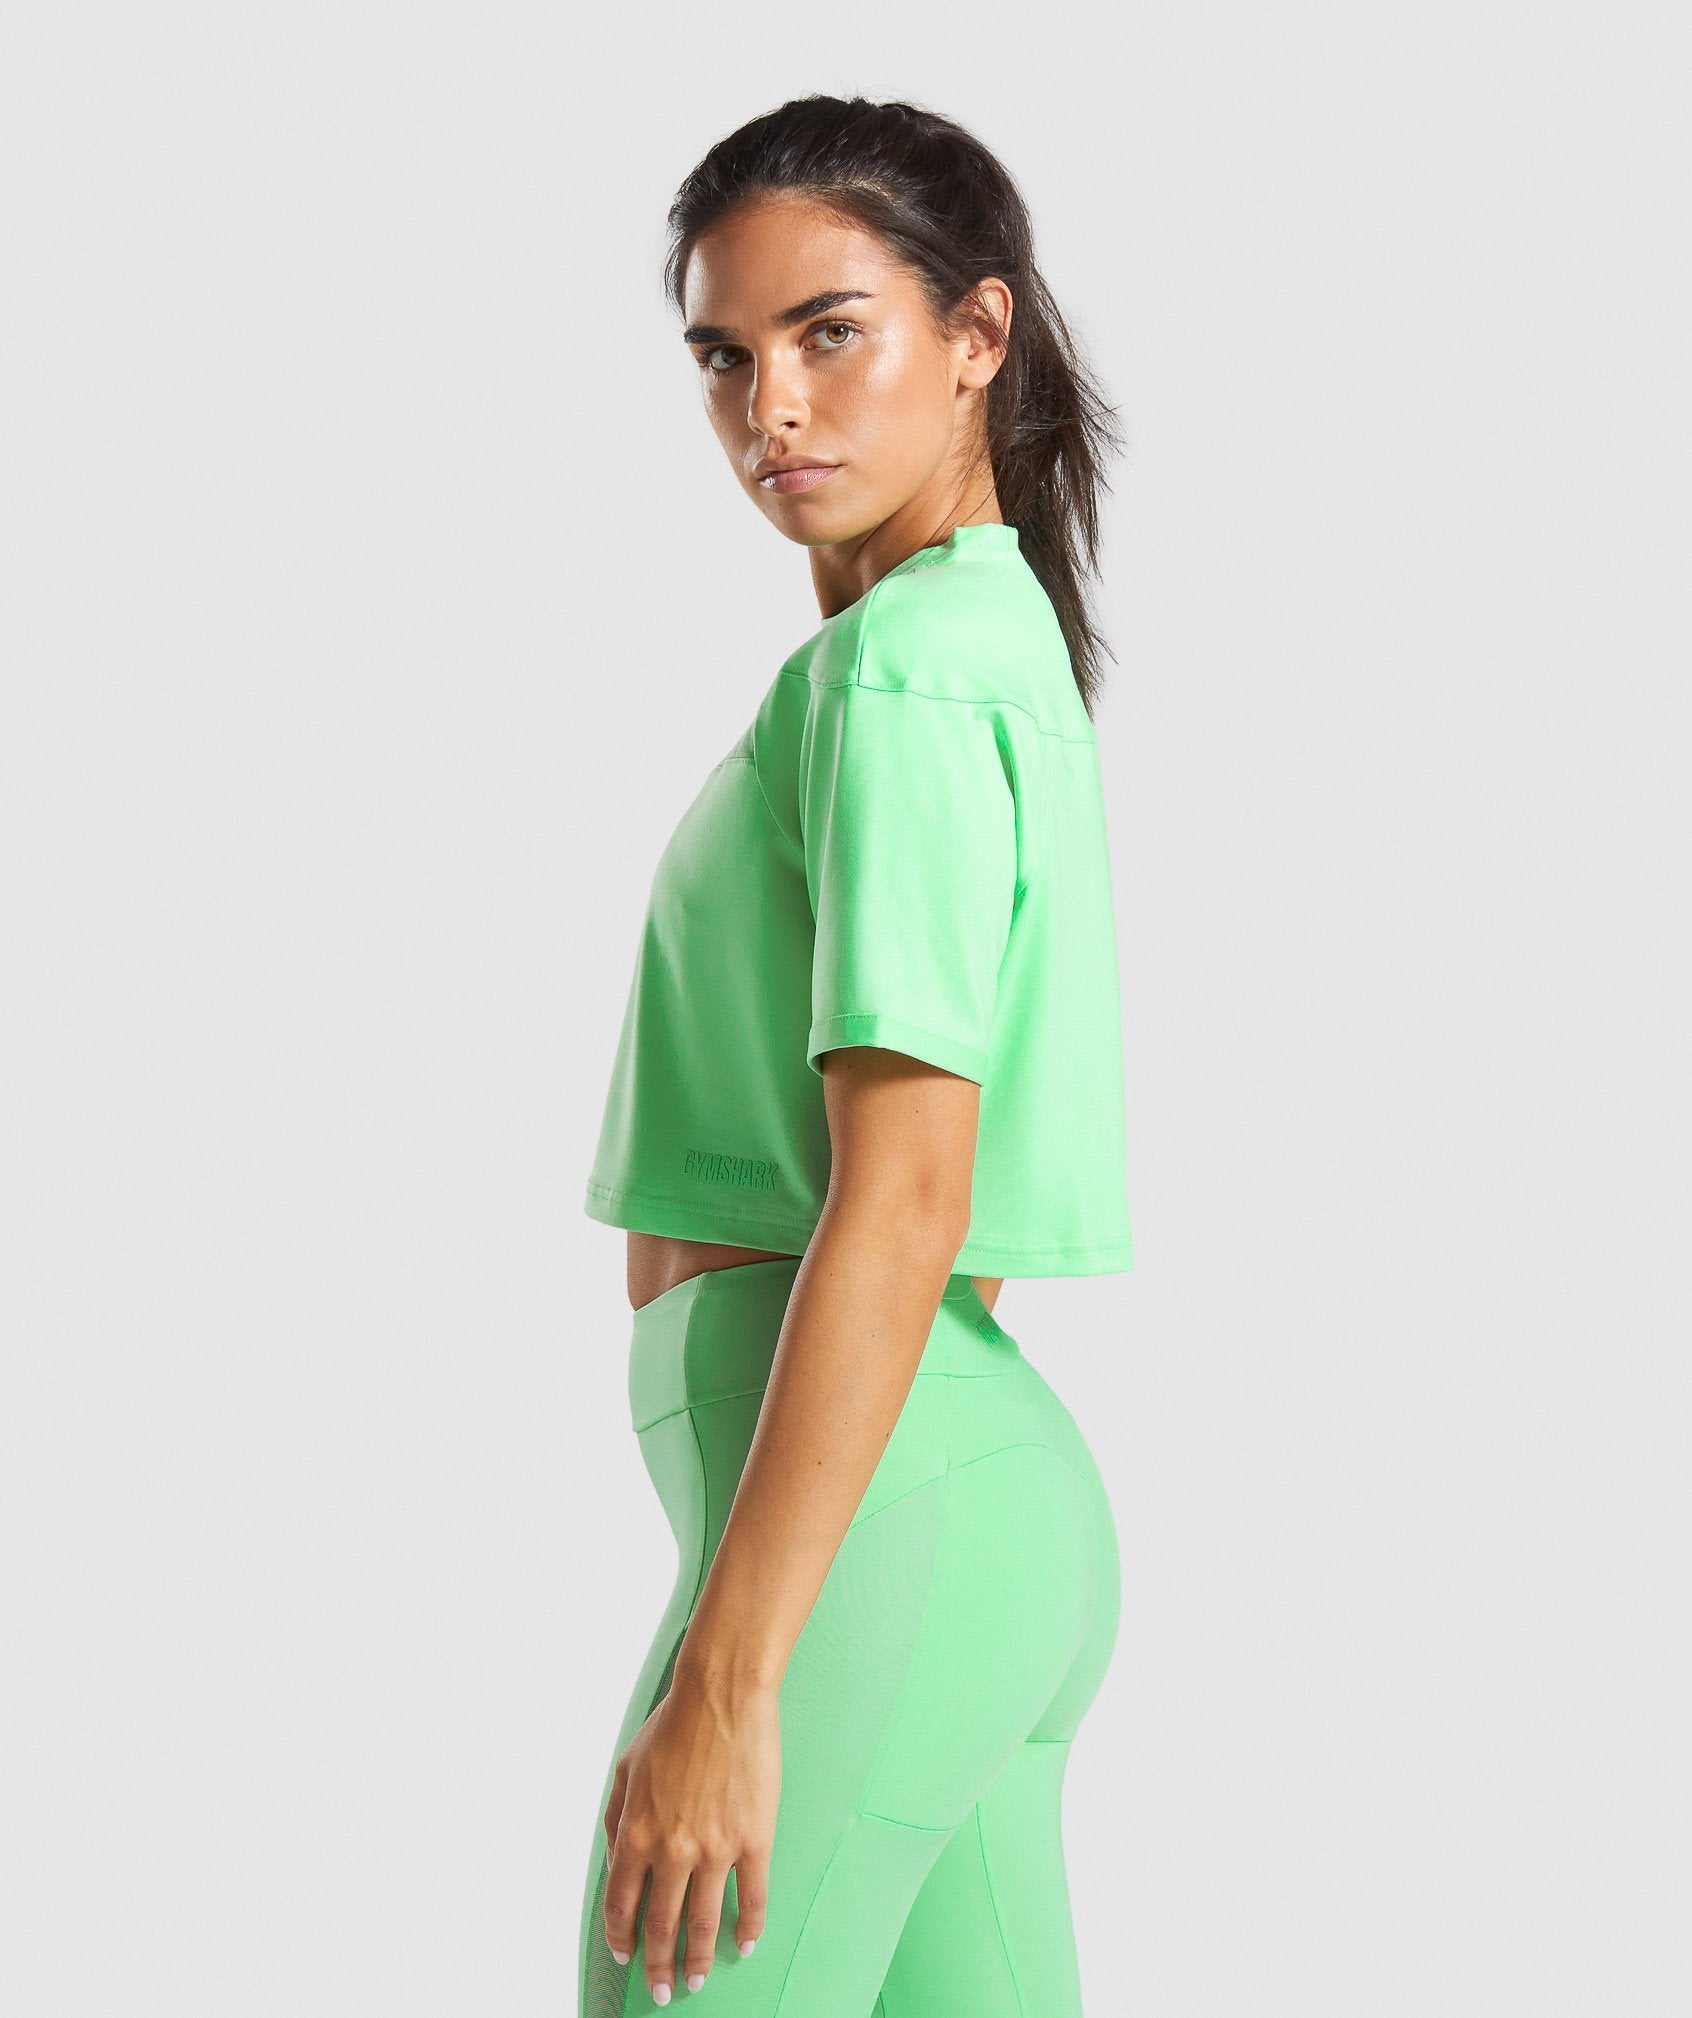 Move Crop Top in Light Green - view 3